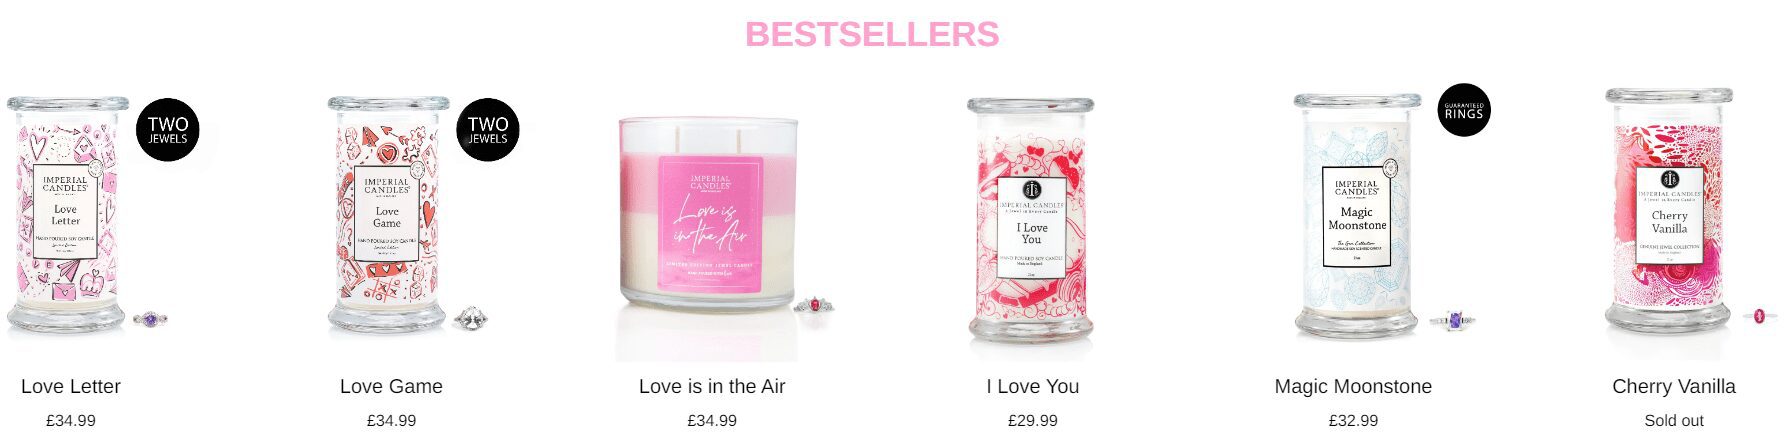 Imperial Candles Products best sellers